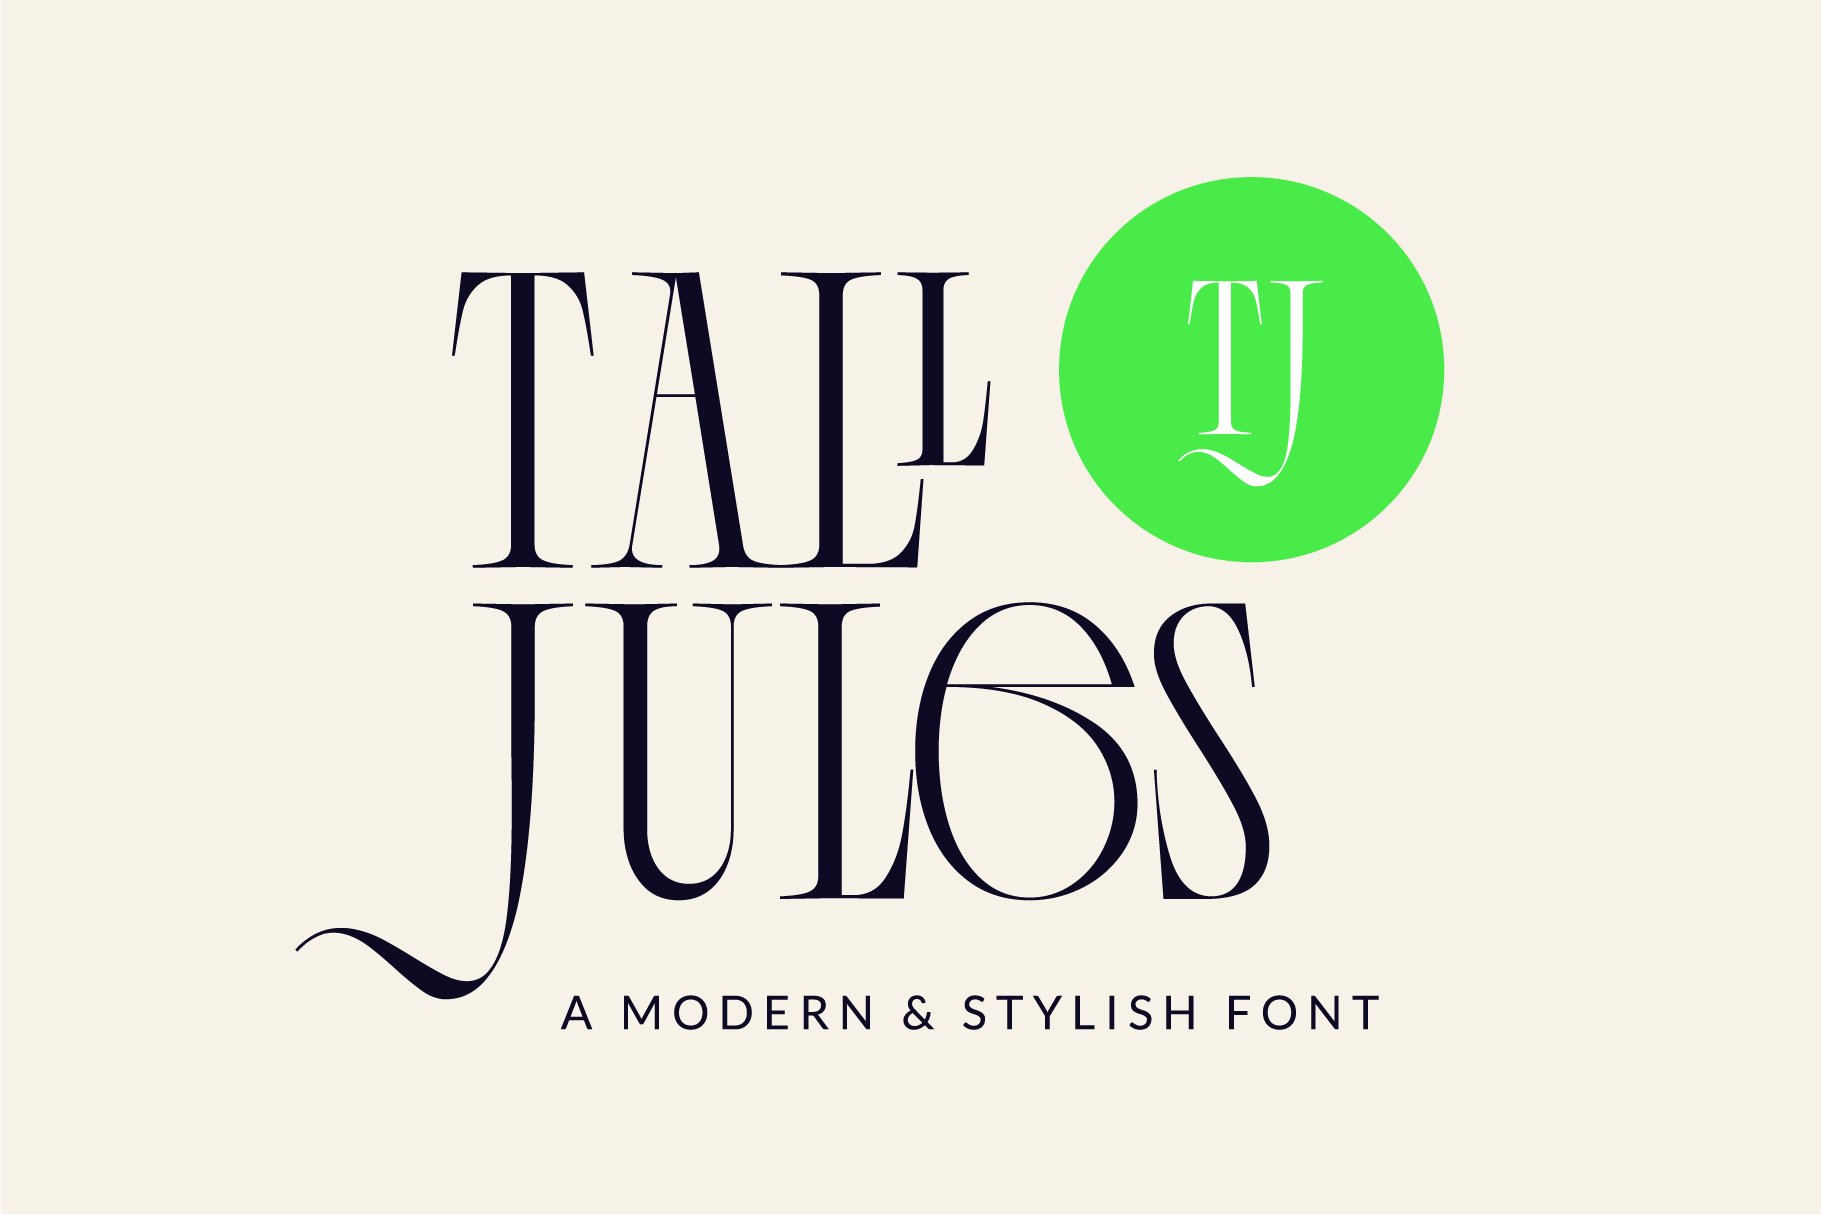 Tall Jules Modern and Stylish Font cover image.